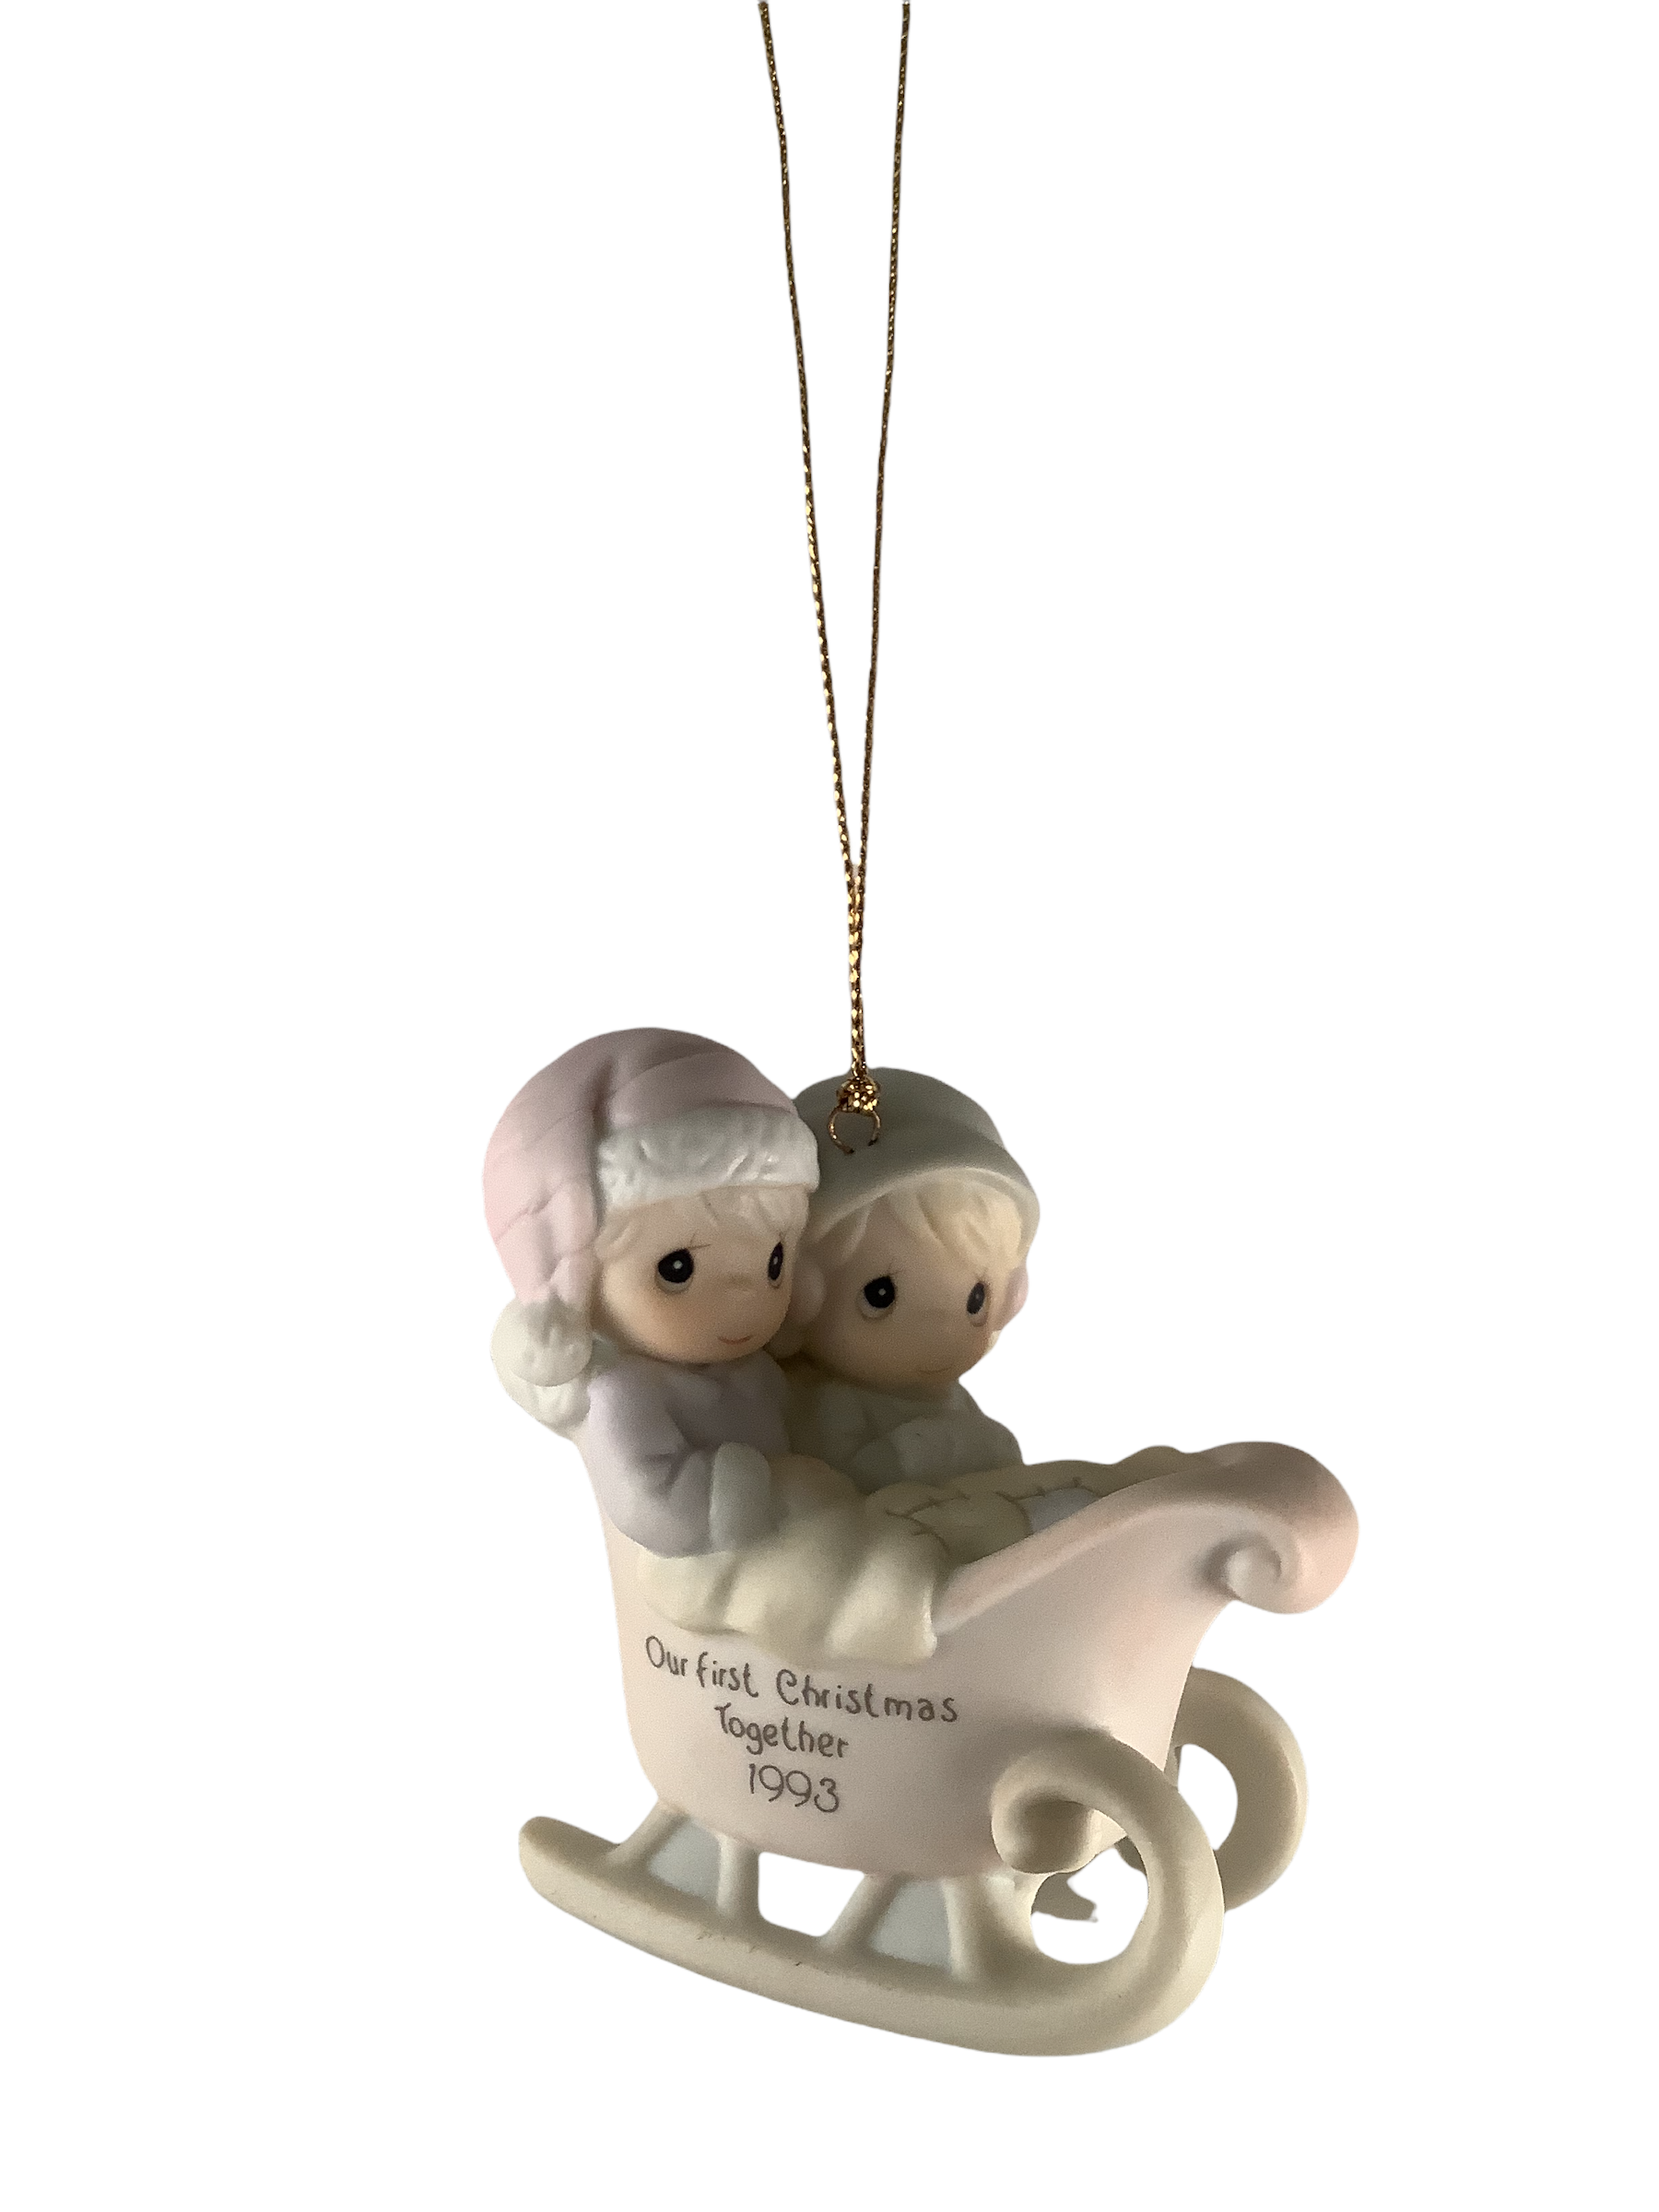 Our First Christmas Together 1993 - Precious Moment Ornament